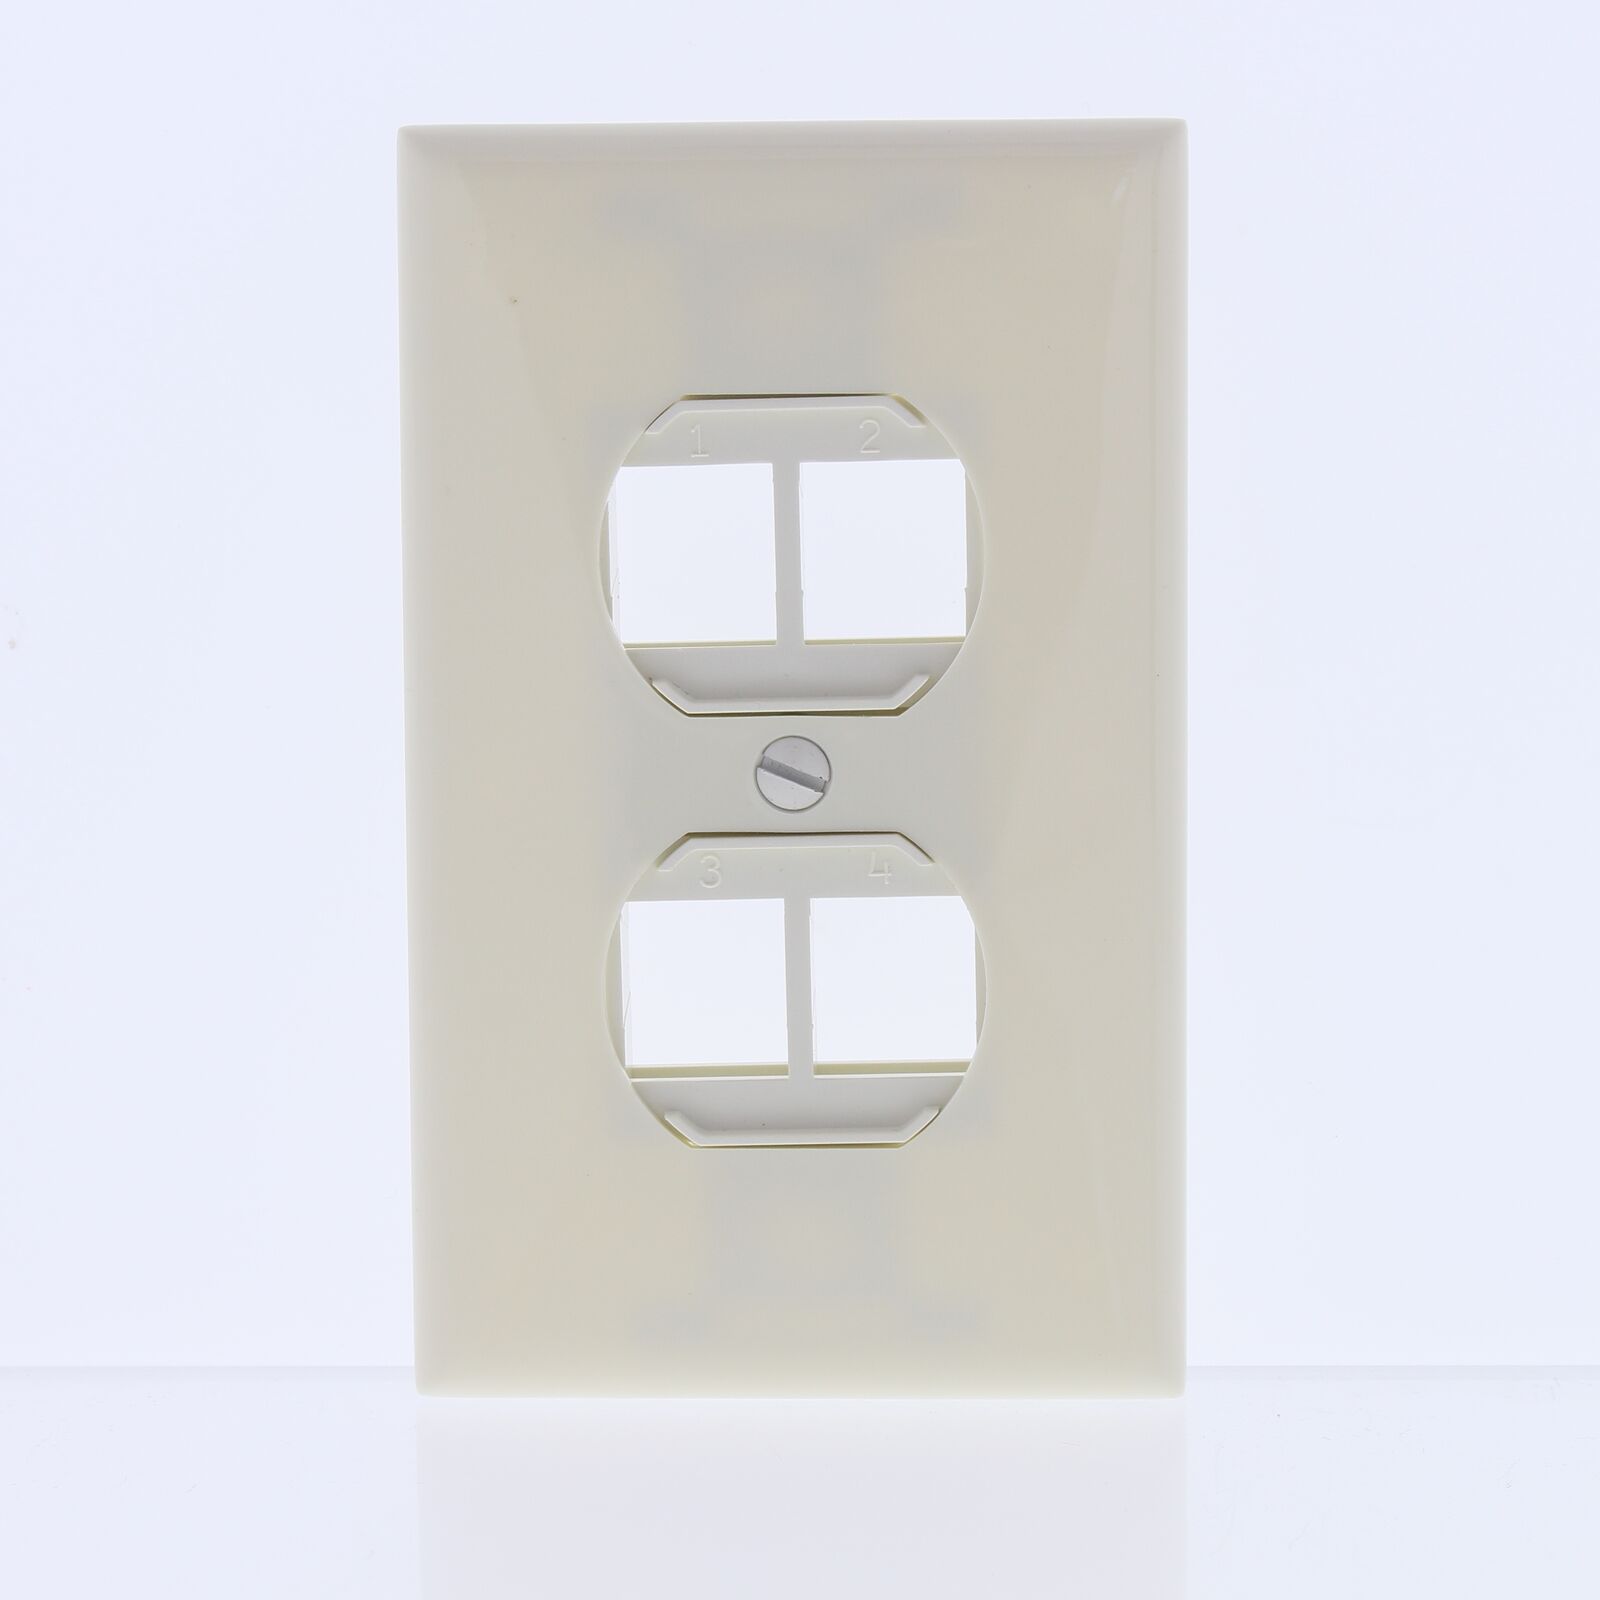 Leviton Almond Snap-In 4-Port Duplex Style 106 Insert PLUS Cover 41087-4A